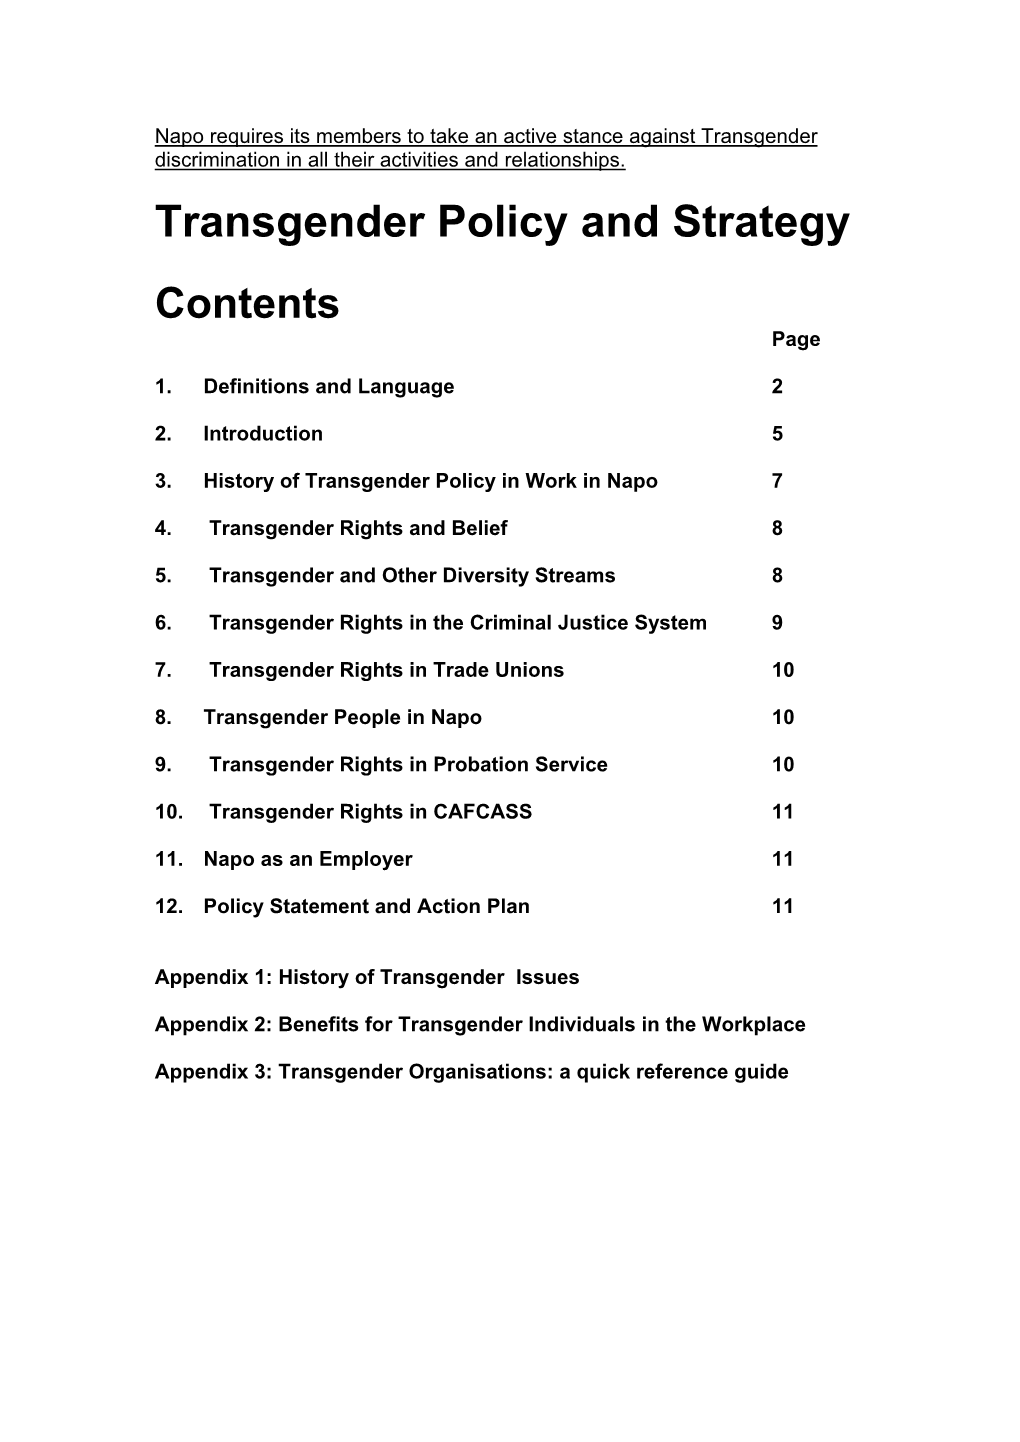 Transgender Policy and Strategy